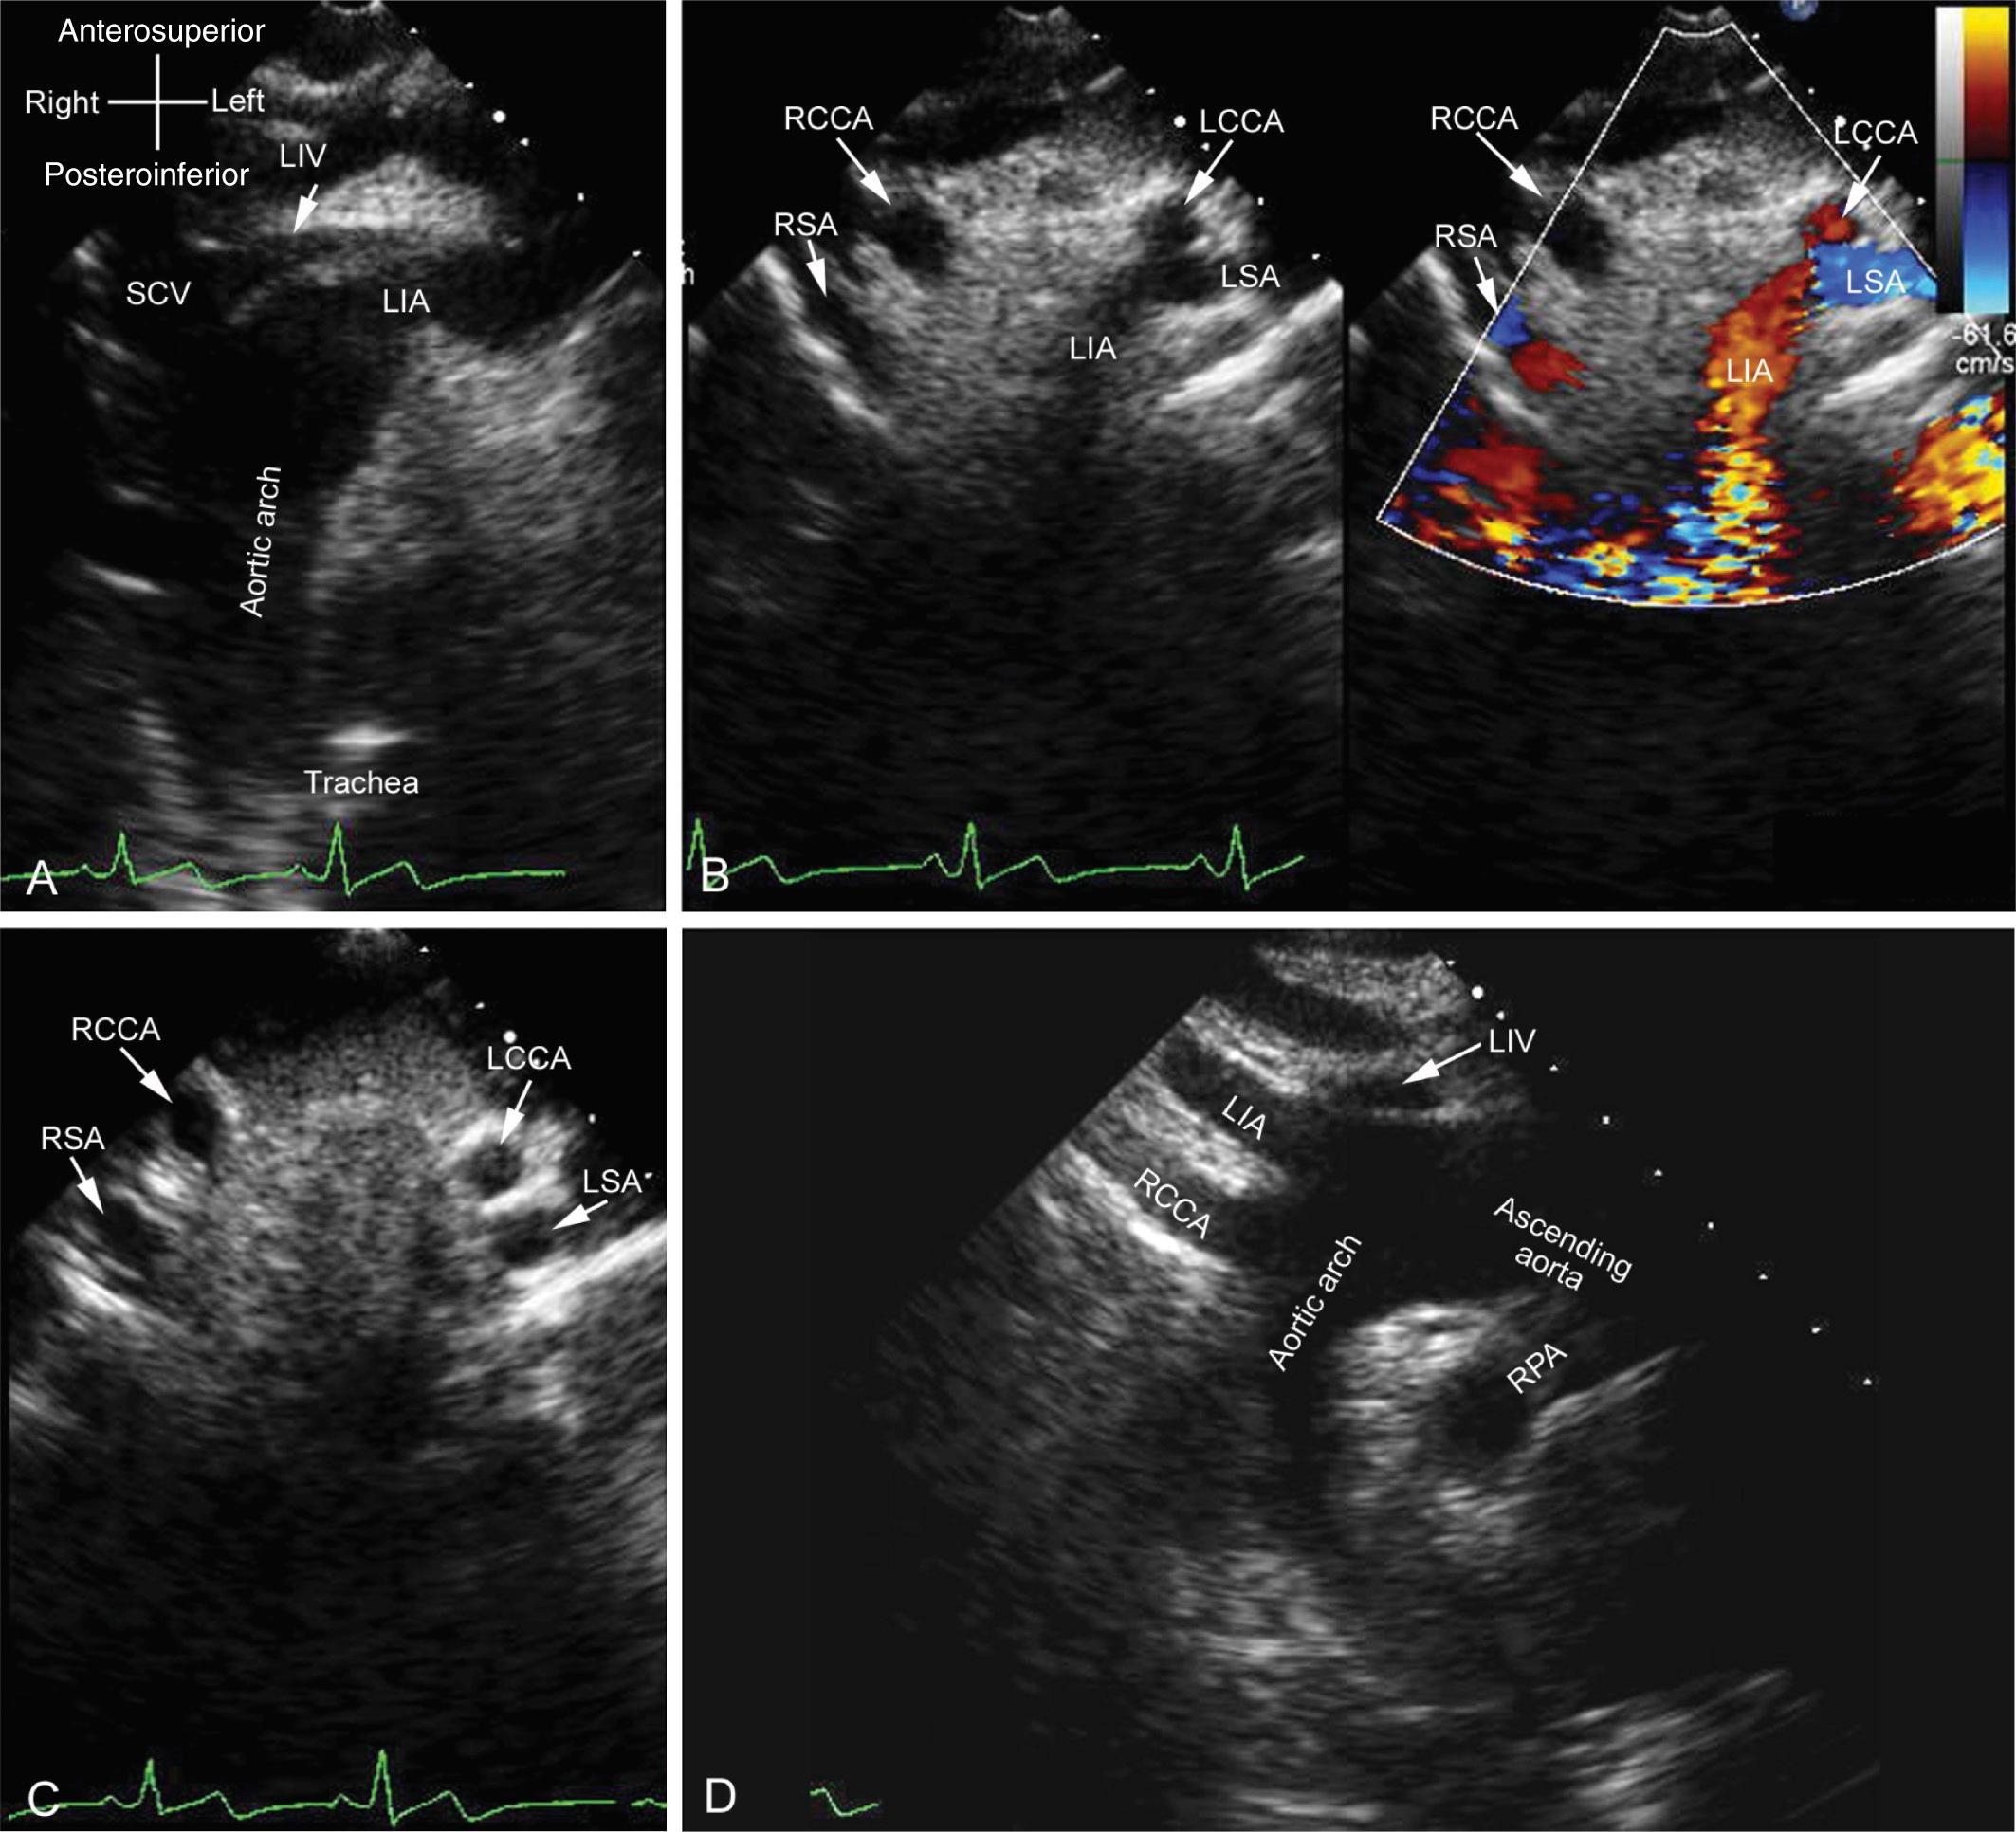 Fig. 47.17, Standardized echocardiographic approach to show the anatomy of the aortic arch in a patient with right aortic arch (RAA) and mirror-image branching. The position of the aortic arch relative to the trachea is identified in a downward tilted transverse view from a suprasternal approach (A). Sweeping upward with the transducer permits ascertainment of the origins of the brachiocephalic arteries (B). The first branch in this case is the left brachiocephalic artery (LBA), which bifurcates into the left common carotid artery (LCCA) and left subclavian artery (LSA). With a further sweep upward, the carotid and subclavian arteries can be imaged in an almost symmetric arrangement in the lower neck (C). The transducer is rotated clockwise or counterclockwise to align the ascending and descending aorta with the aortic arch (D). In this instance, the sonographer has mirror-imaged the transducer clearly to demonstrate that there is an RAA. LIA , Left innominate artery; LIV , left innominate vein; RCCA , right common carotid artery; RPA , right pulmonary artery; RSA , right subclavian artery; SCV , superior caval vein.